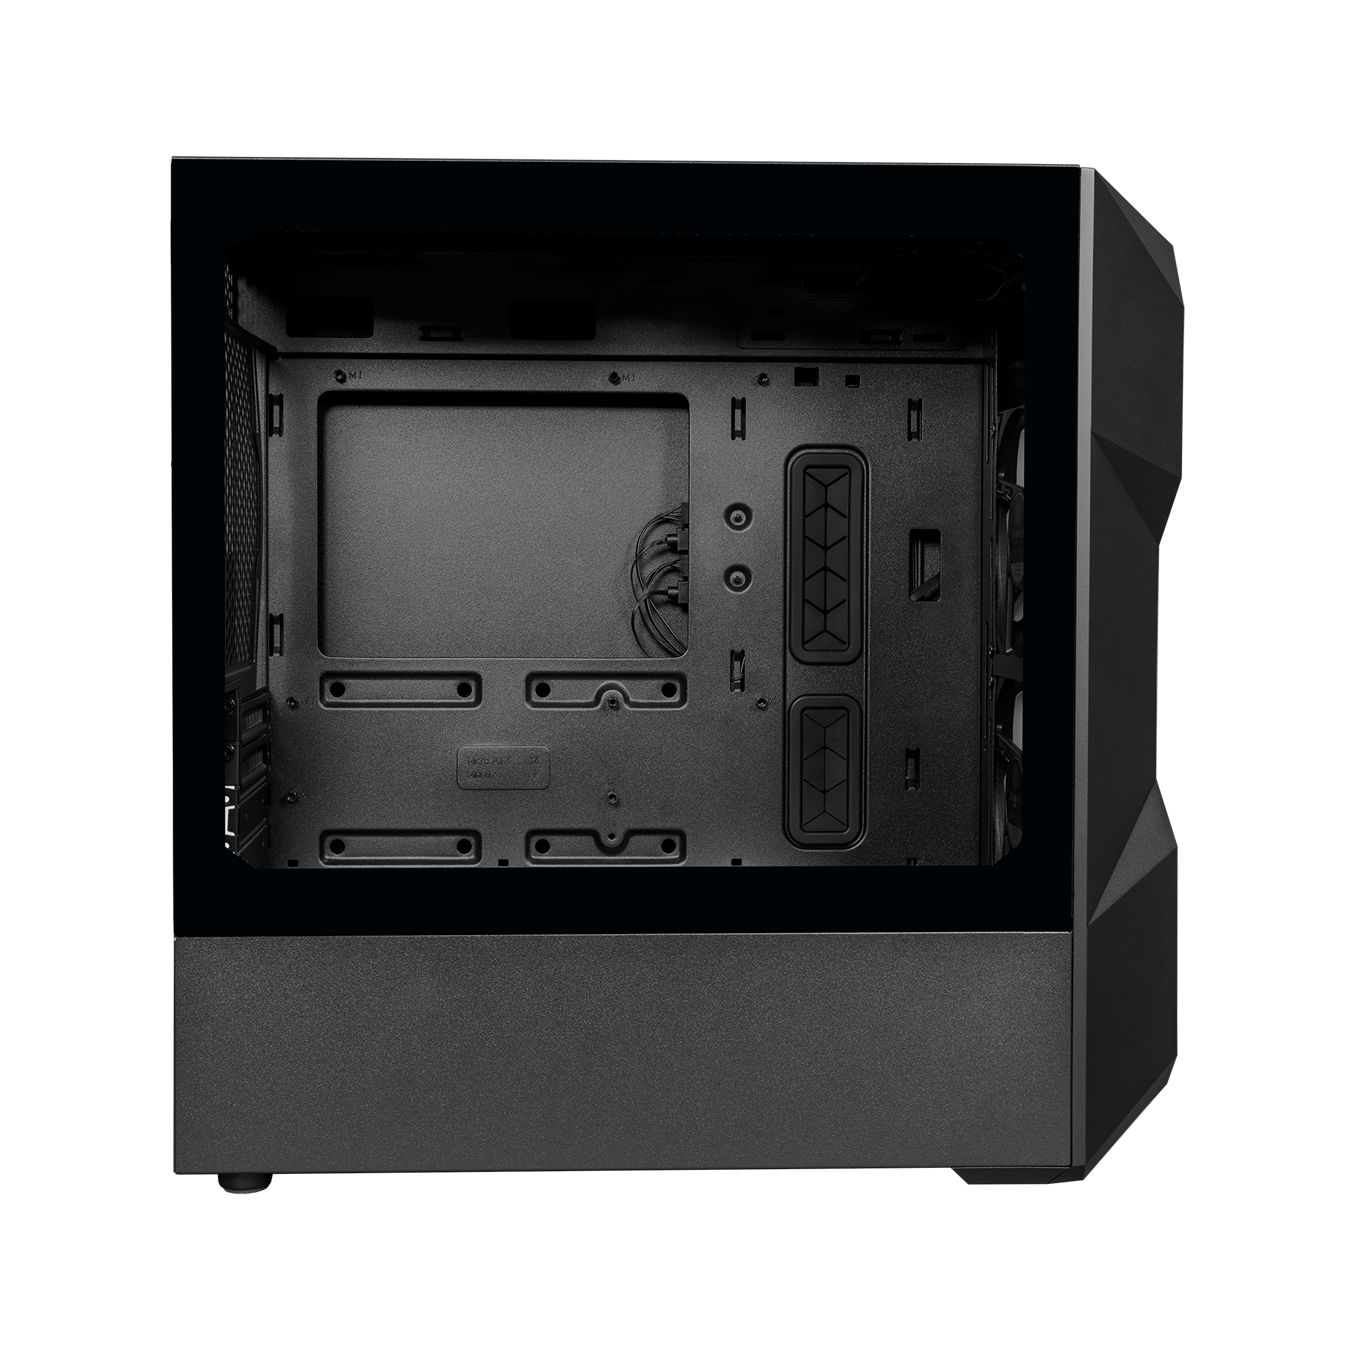 Cooler Master TD300 Mesh Computer Case Black 280mm Radiator Support ARGB & PWM Hub Included High Airflow Case 2 x 120mm ARGB Fans Pre-Installed Gaming Case-Cabinet-Cooler Master-computerspace